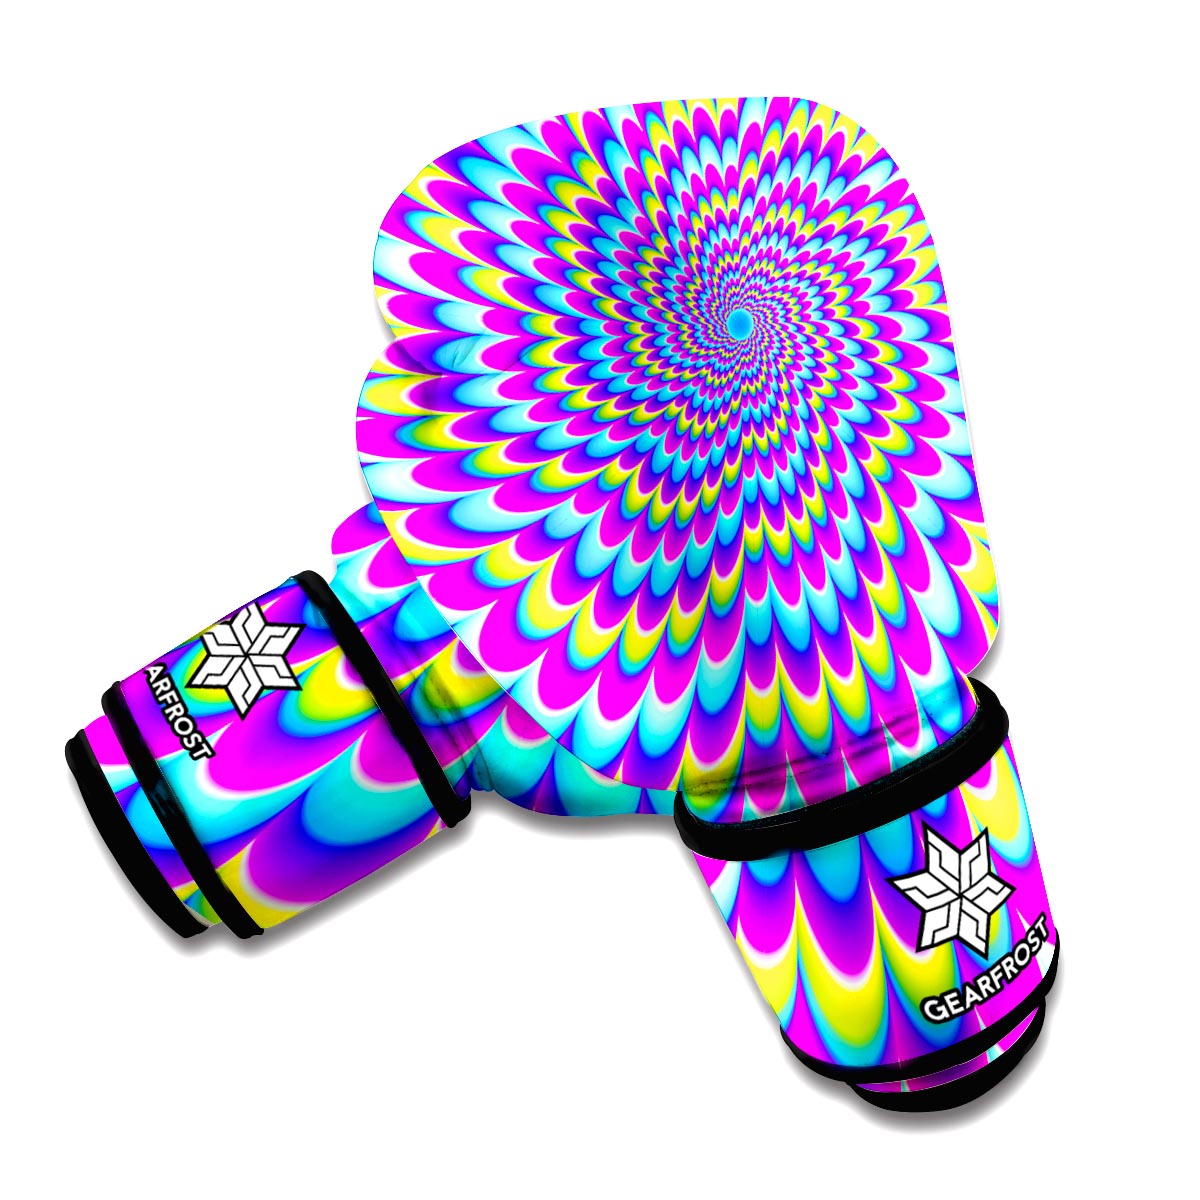 Abstract Dizzy Moving Optical Illusion Boxing Gloves